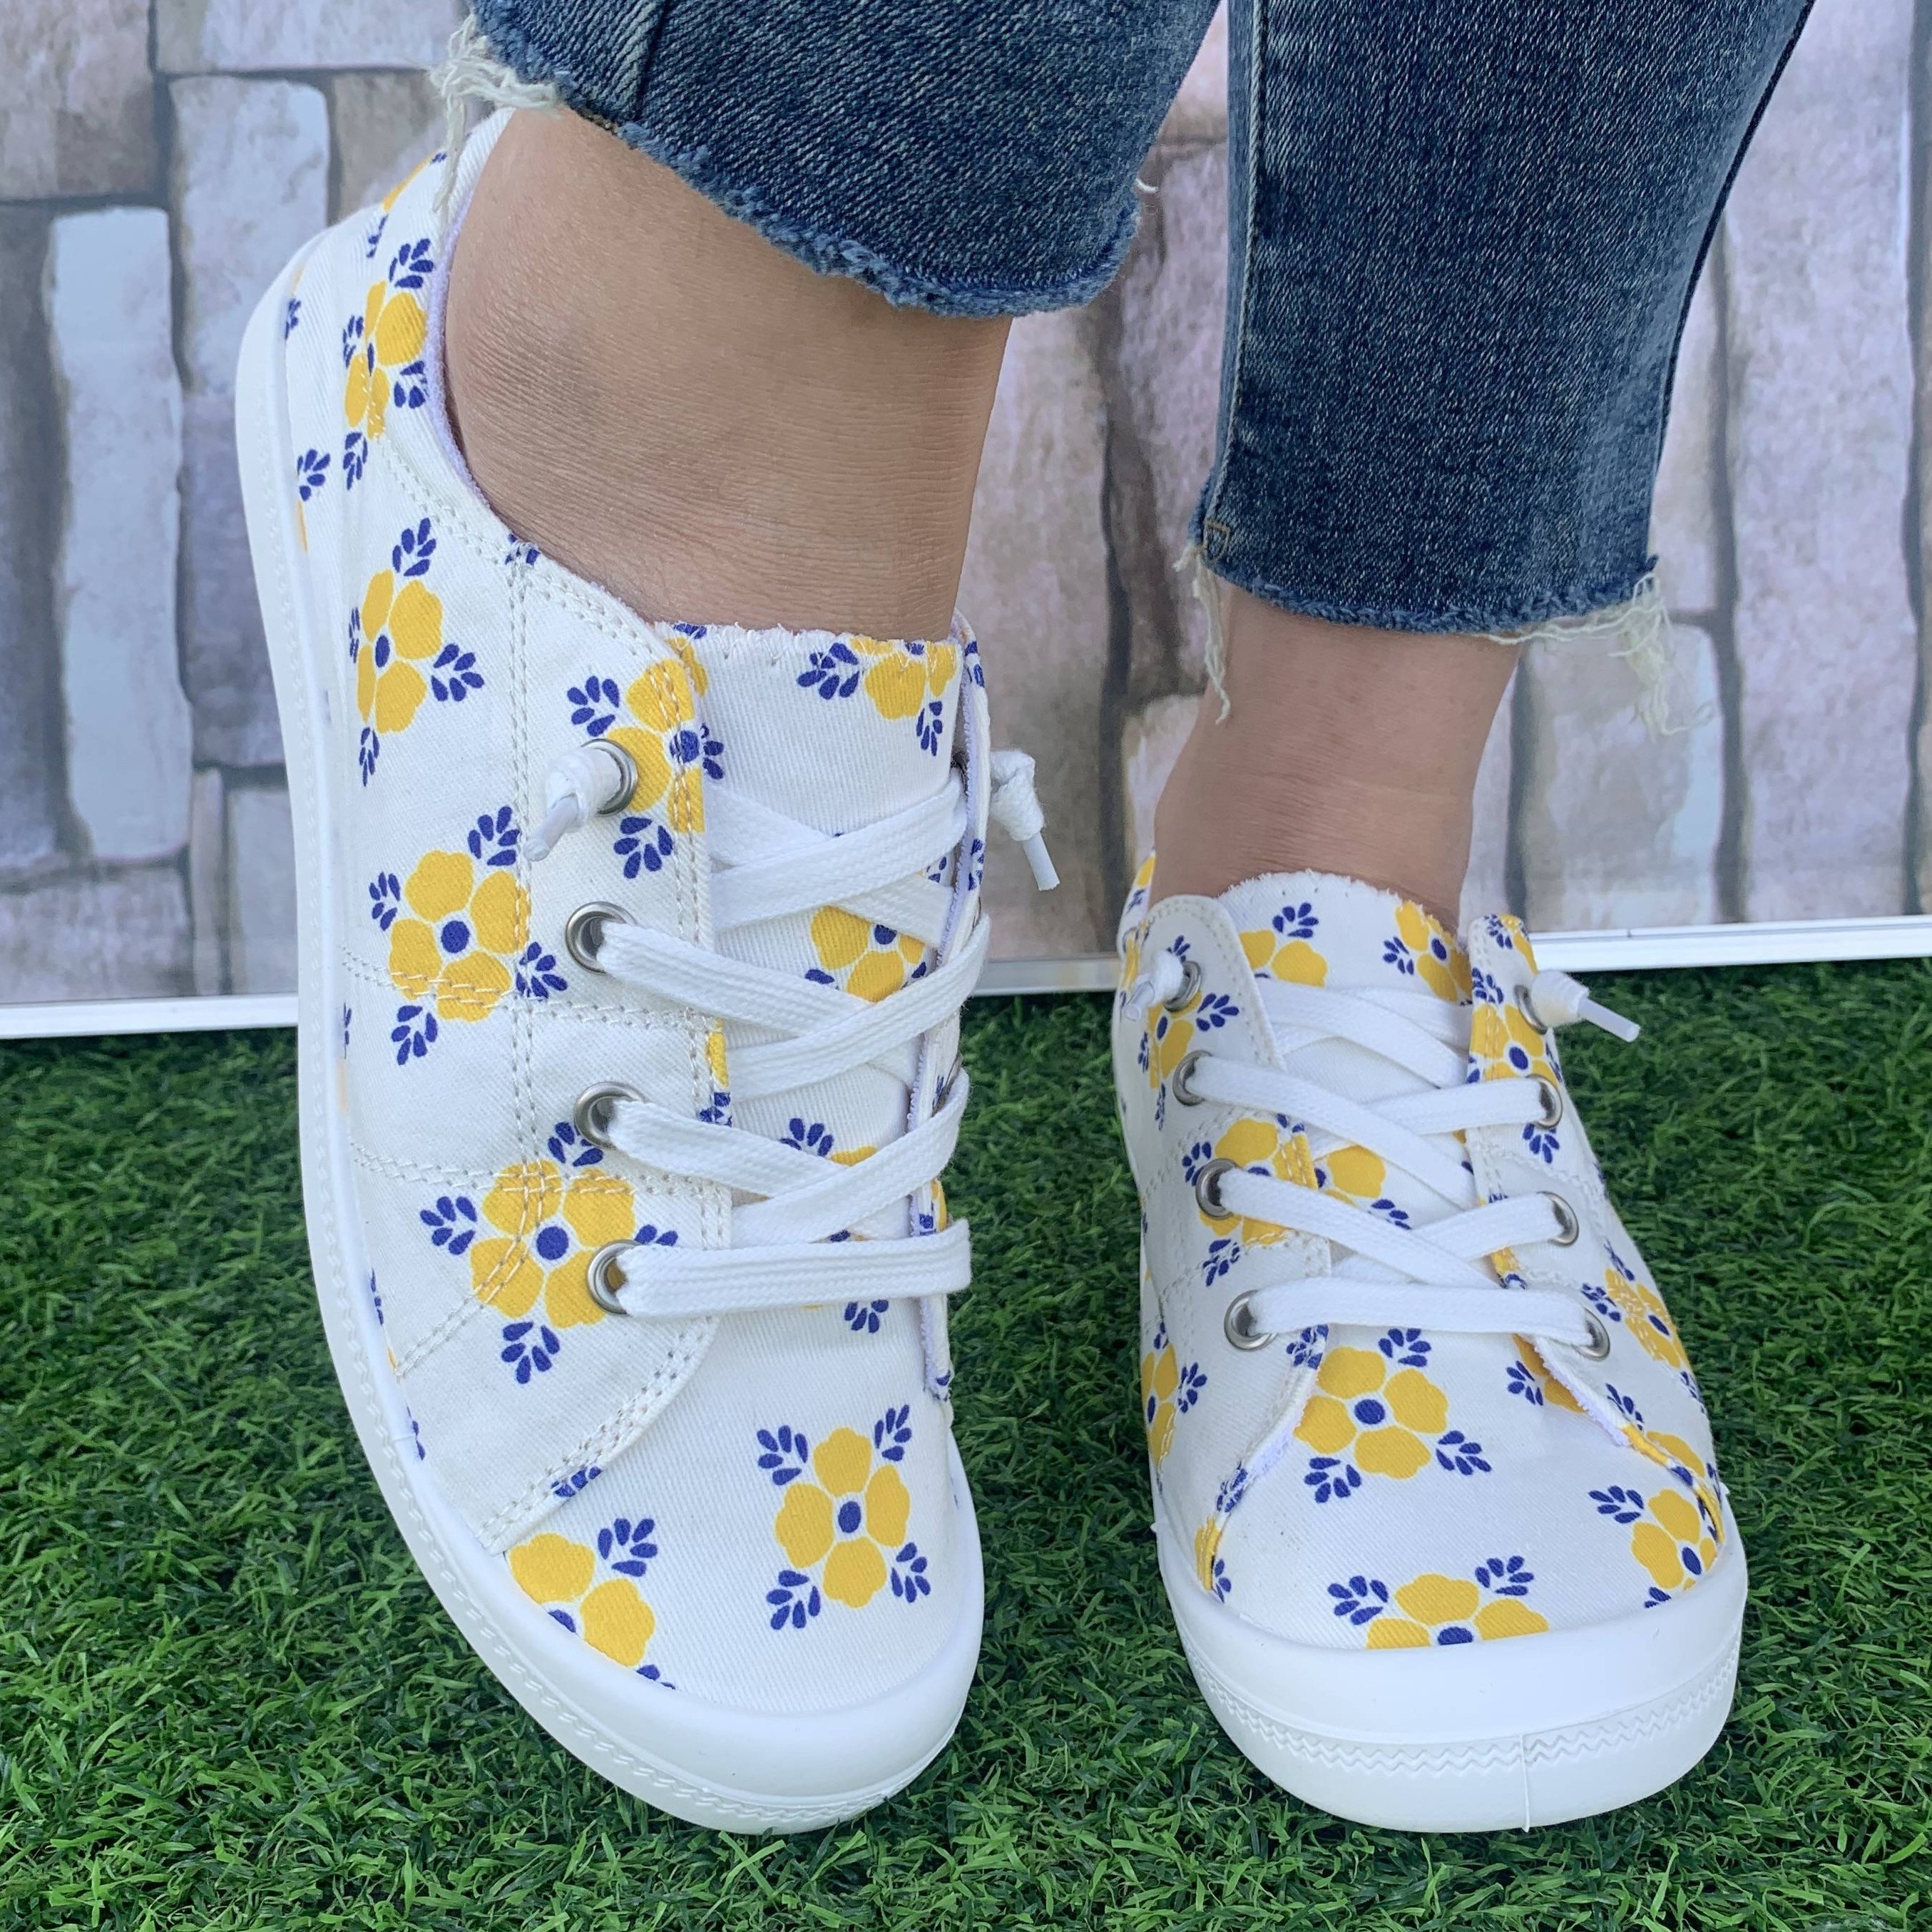 

Women's Flower Pattern Canvas Shoes, Casual Lace Up Outdoor Shoes, Lightweight Low Top Sneakers